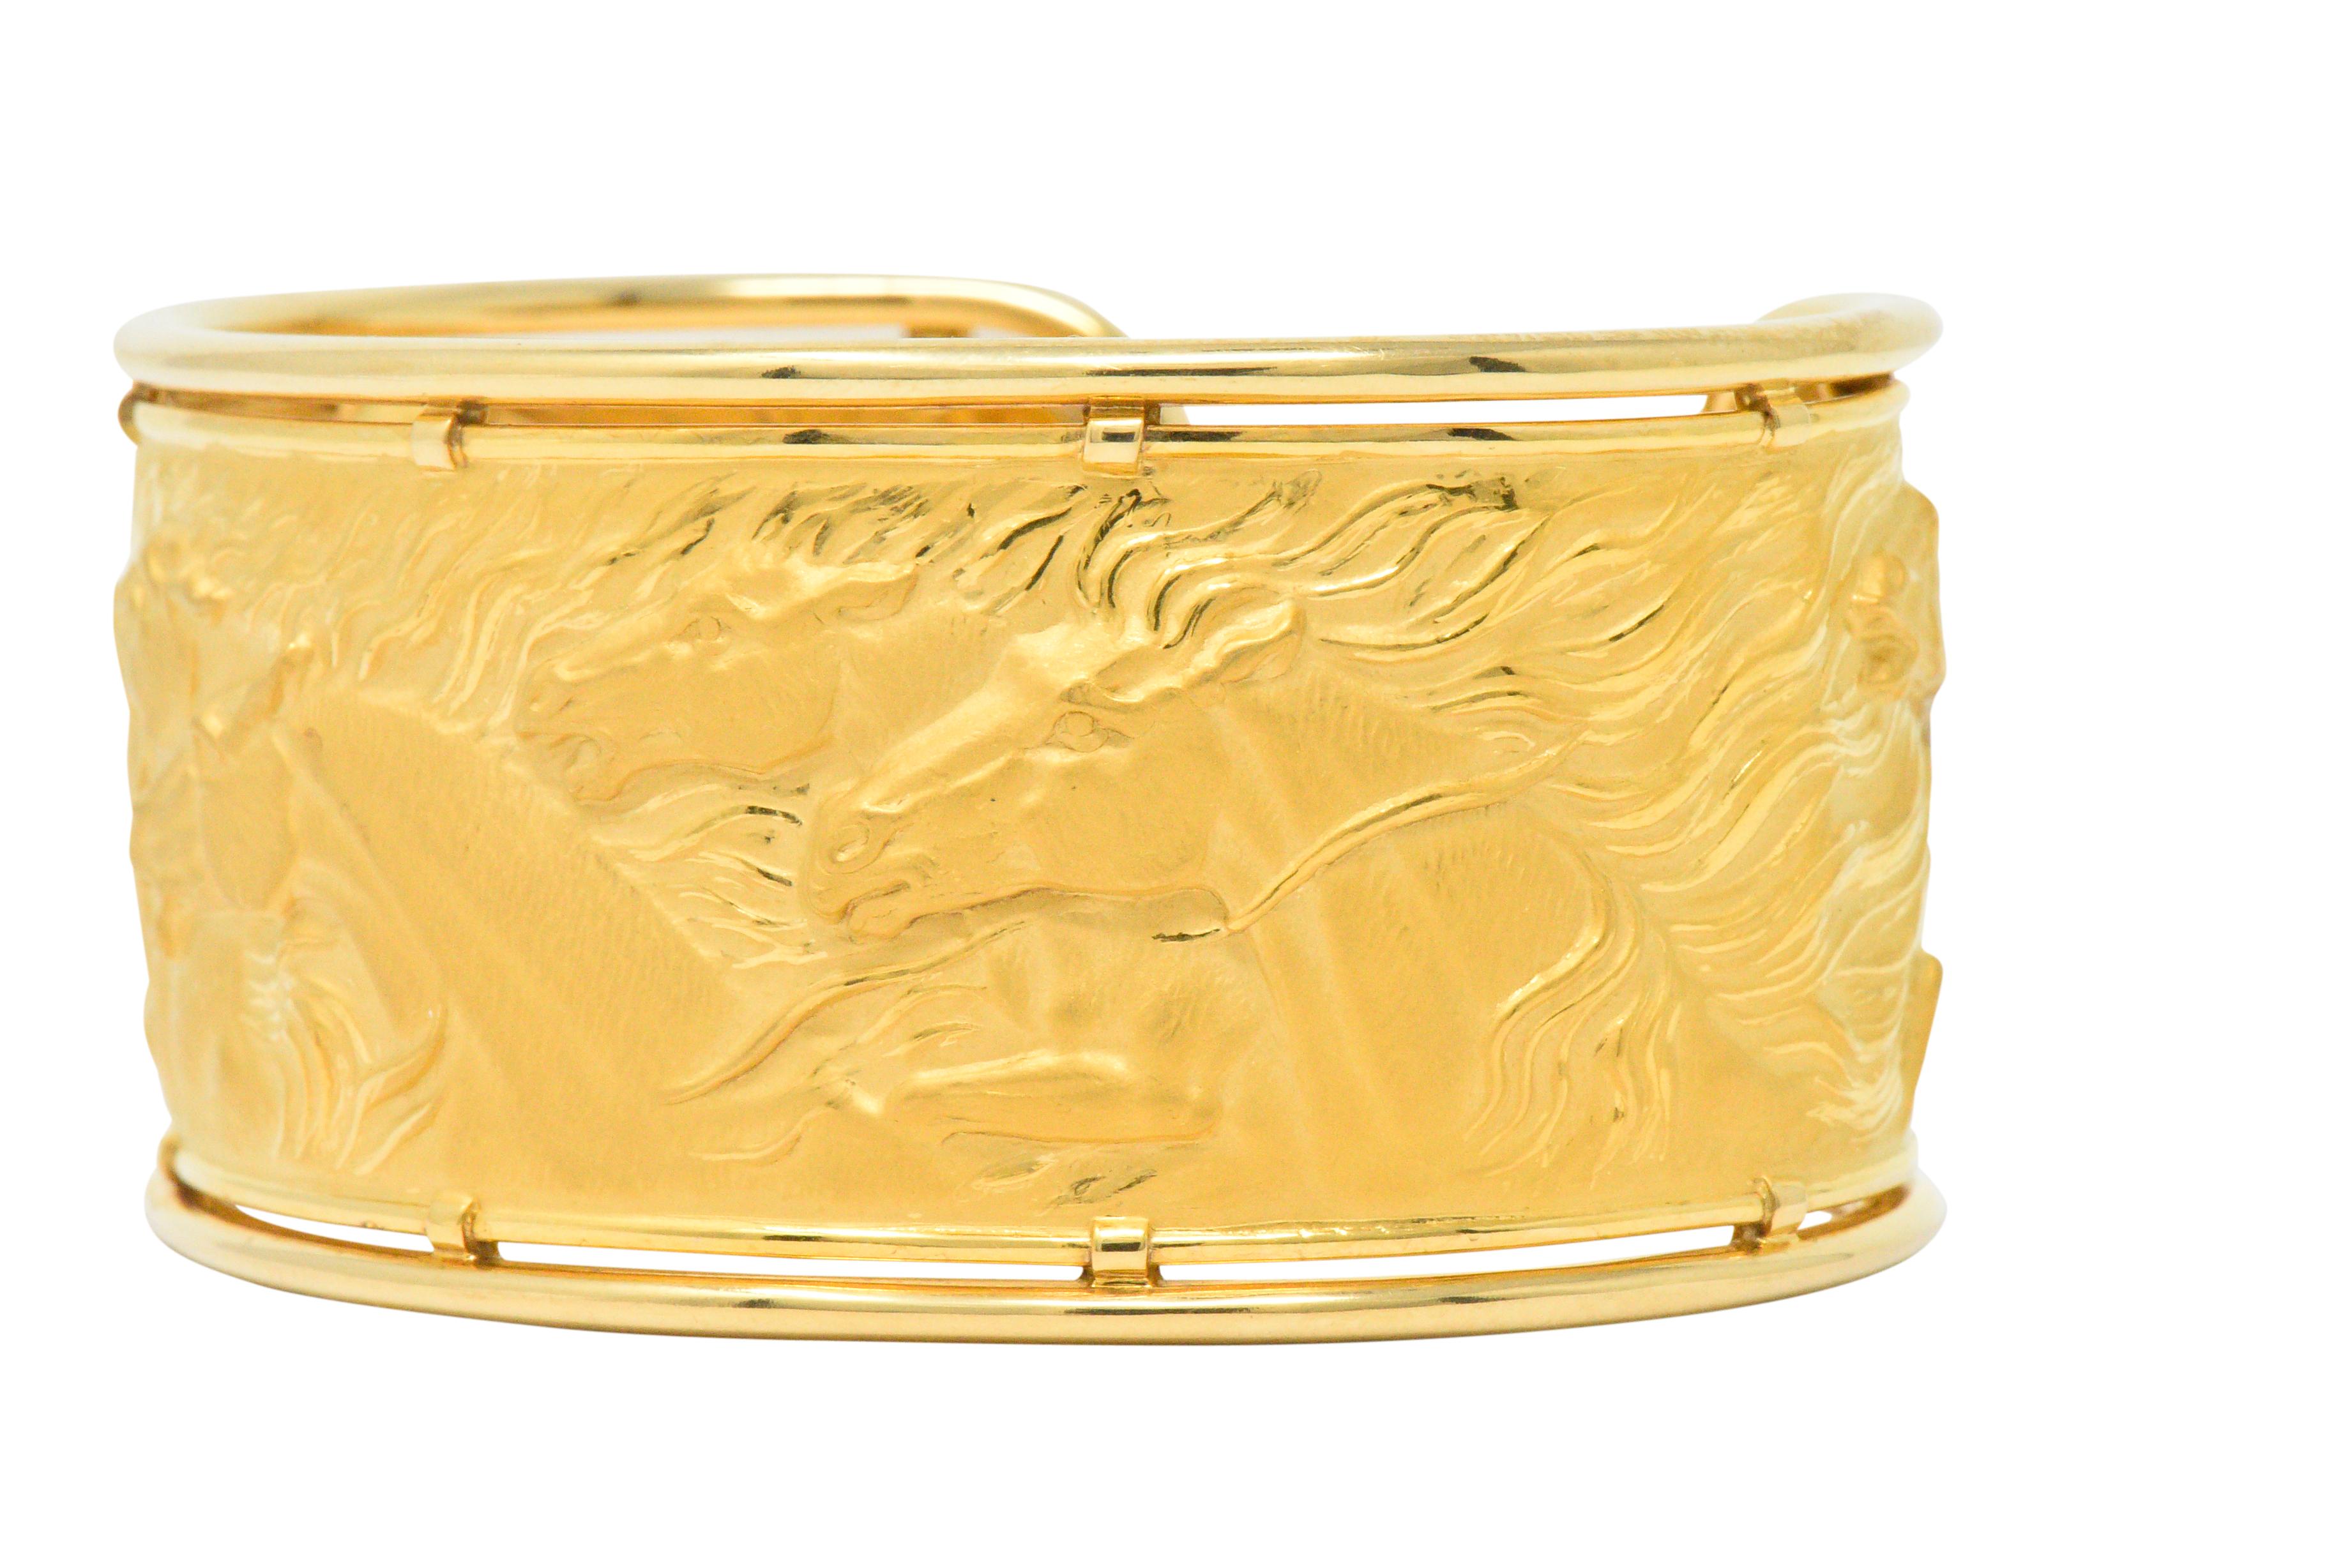 Cuff style bracelet with repoussé matte gold depicting a herd of galloping horses

With polished gold wire frame

Part of the Ecuestre collection

Maker's mark for Carrera y Carrera and numbered

Inner Length: 6 Inches

Width: Approx. 1 1/4